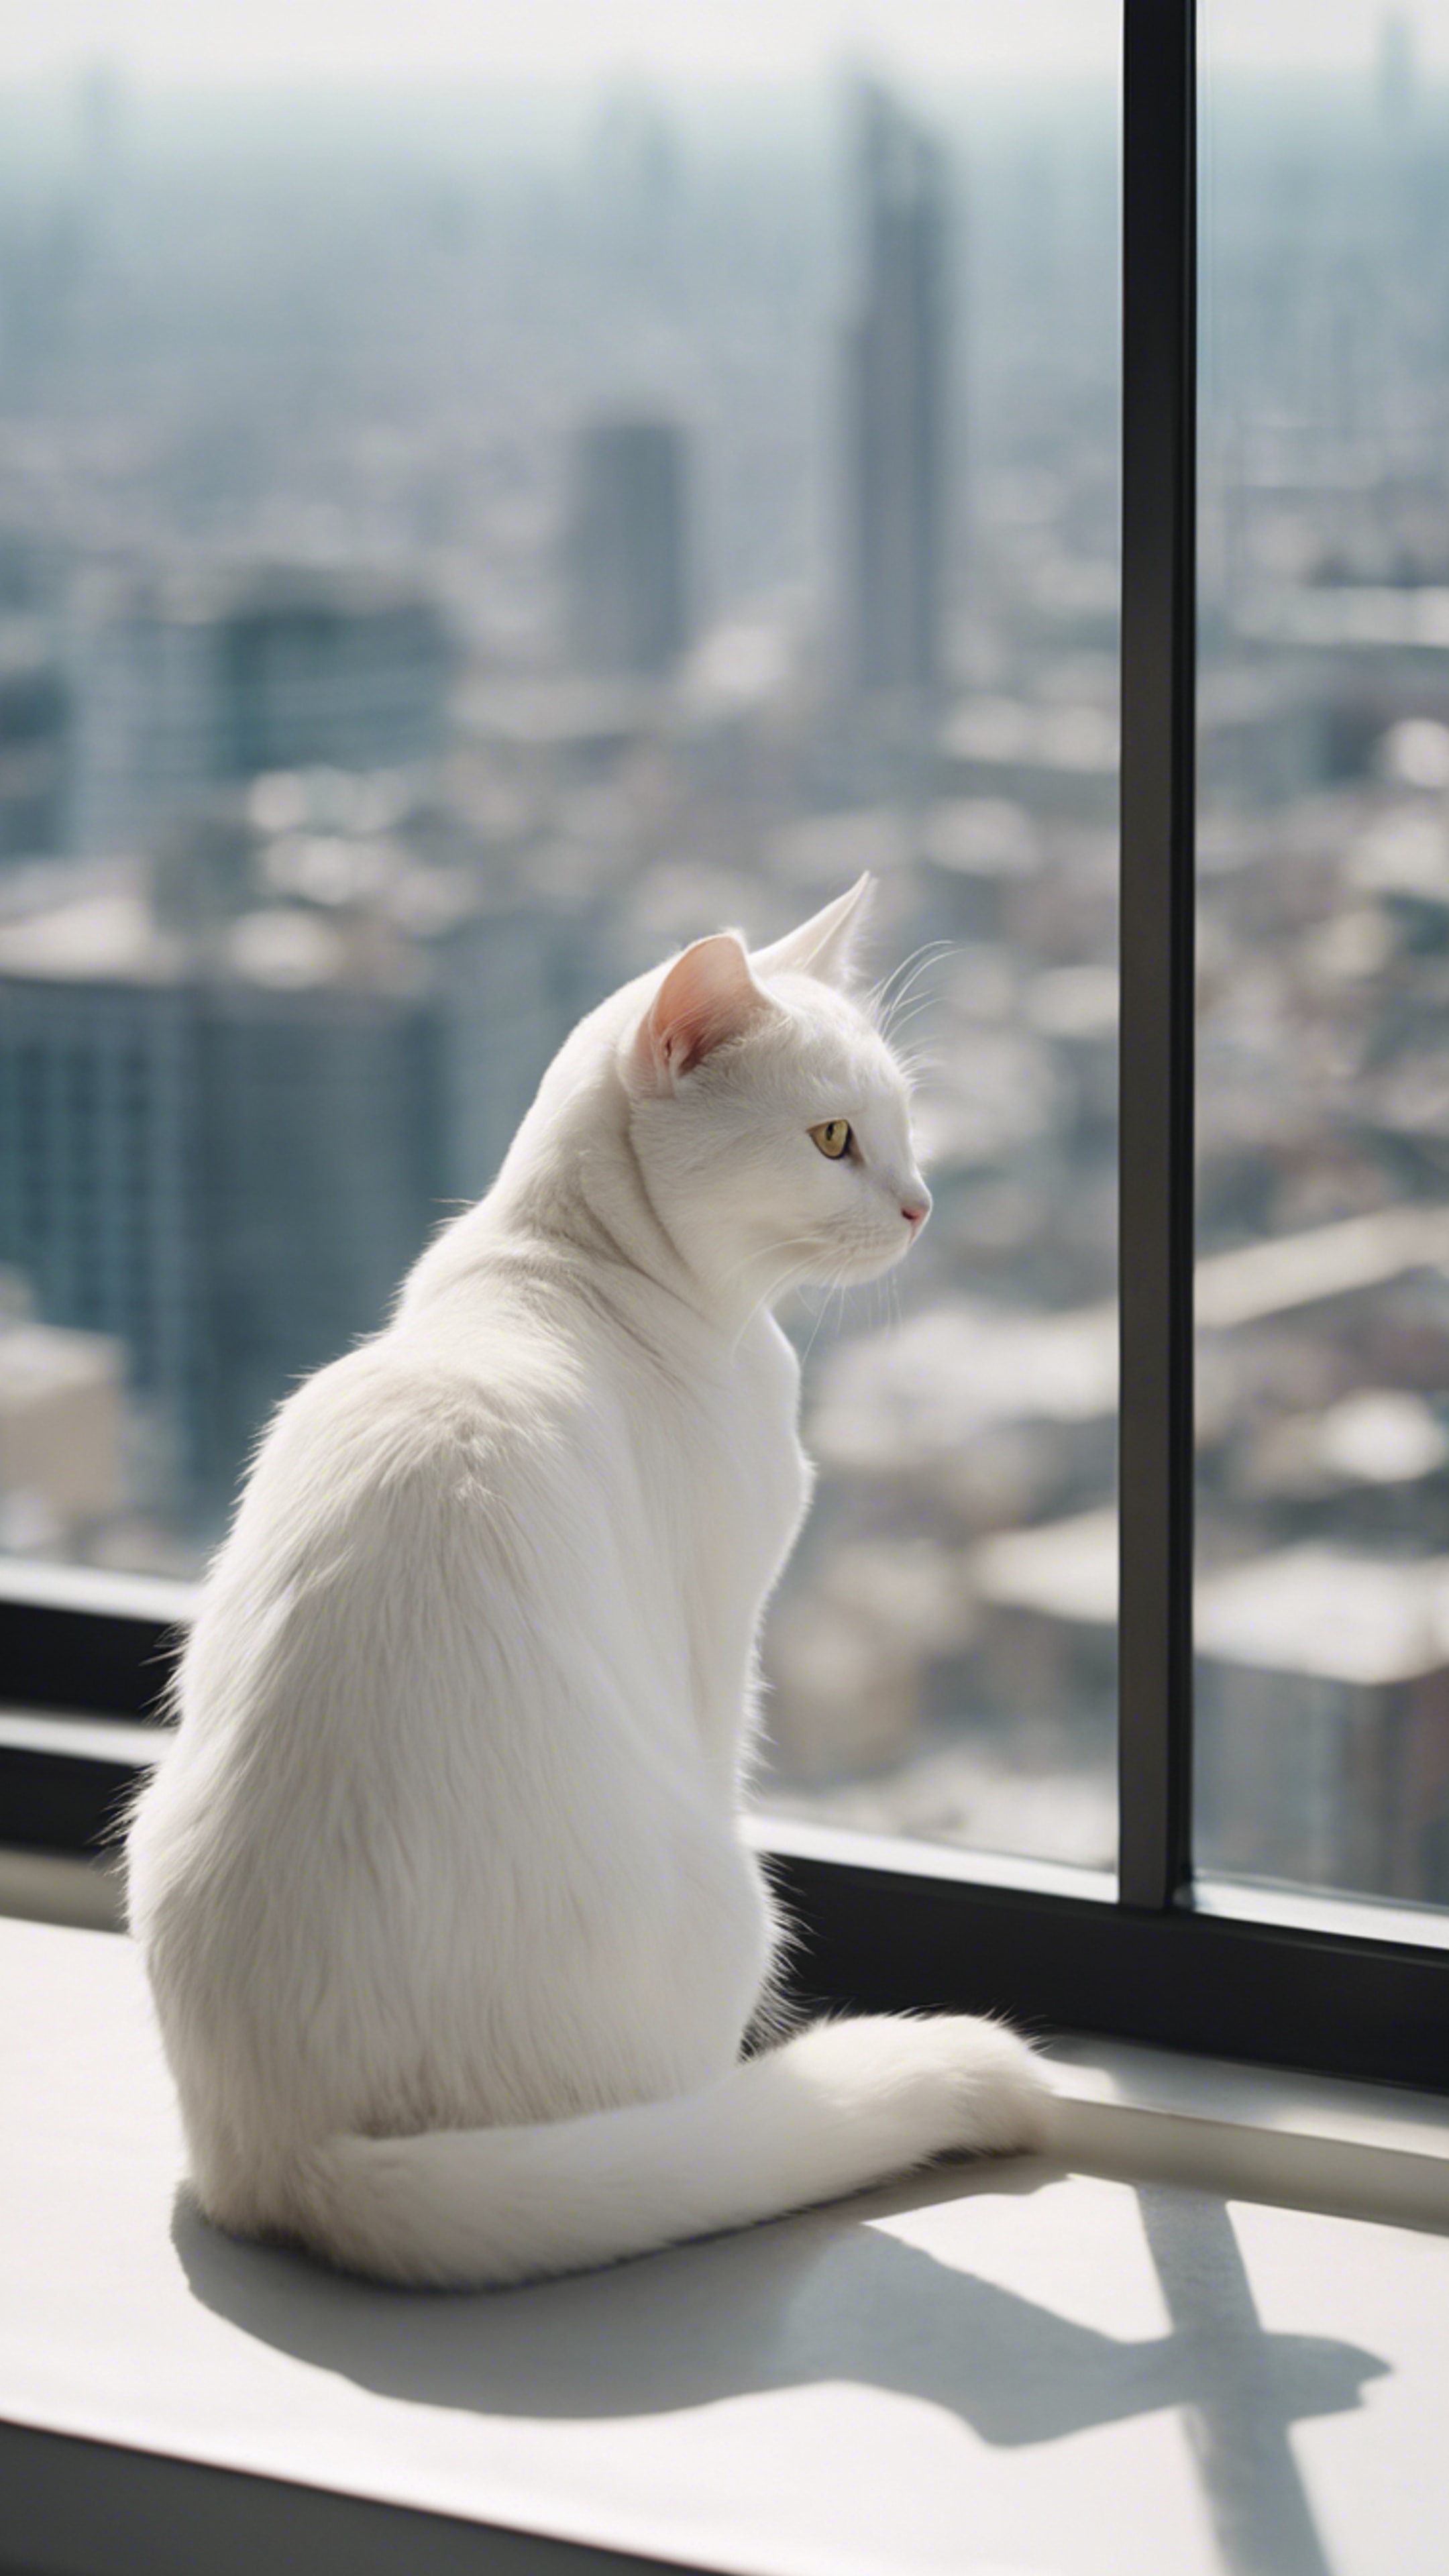 A white cat lying peacefully on a windowsill, admiring a city view from a skyscraper. ورق الجدران[751c381e97644d32a2eb]